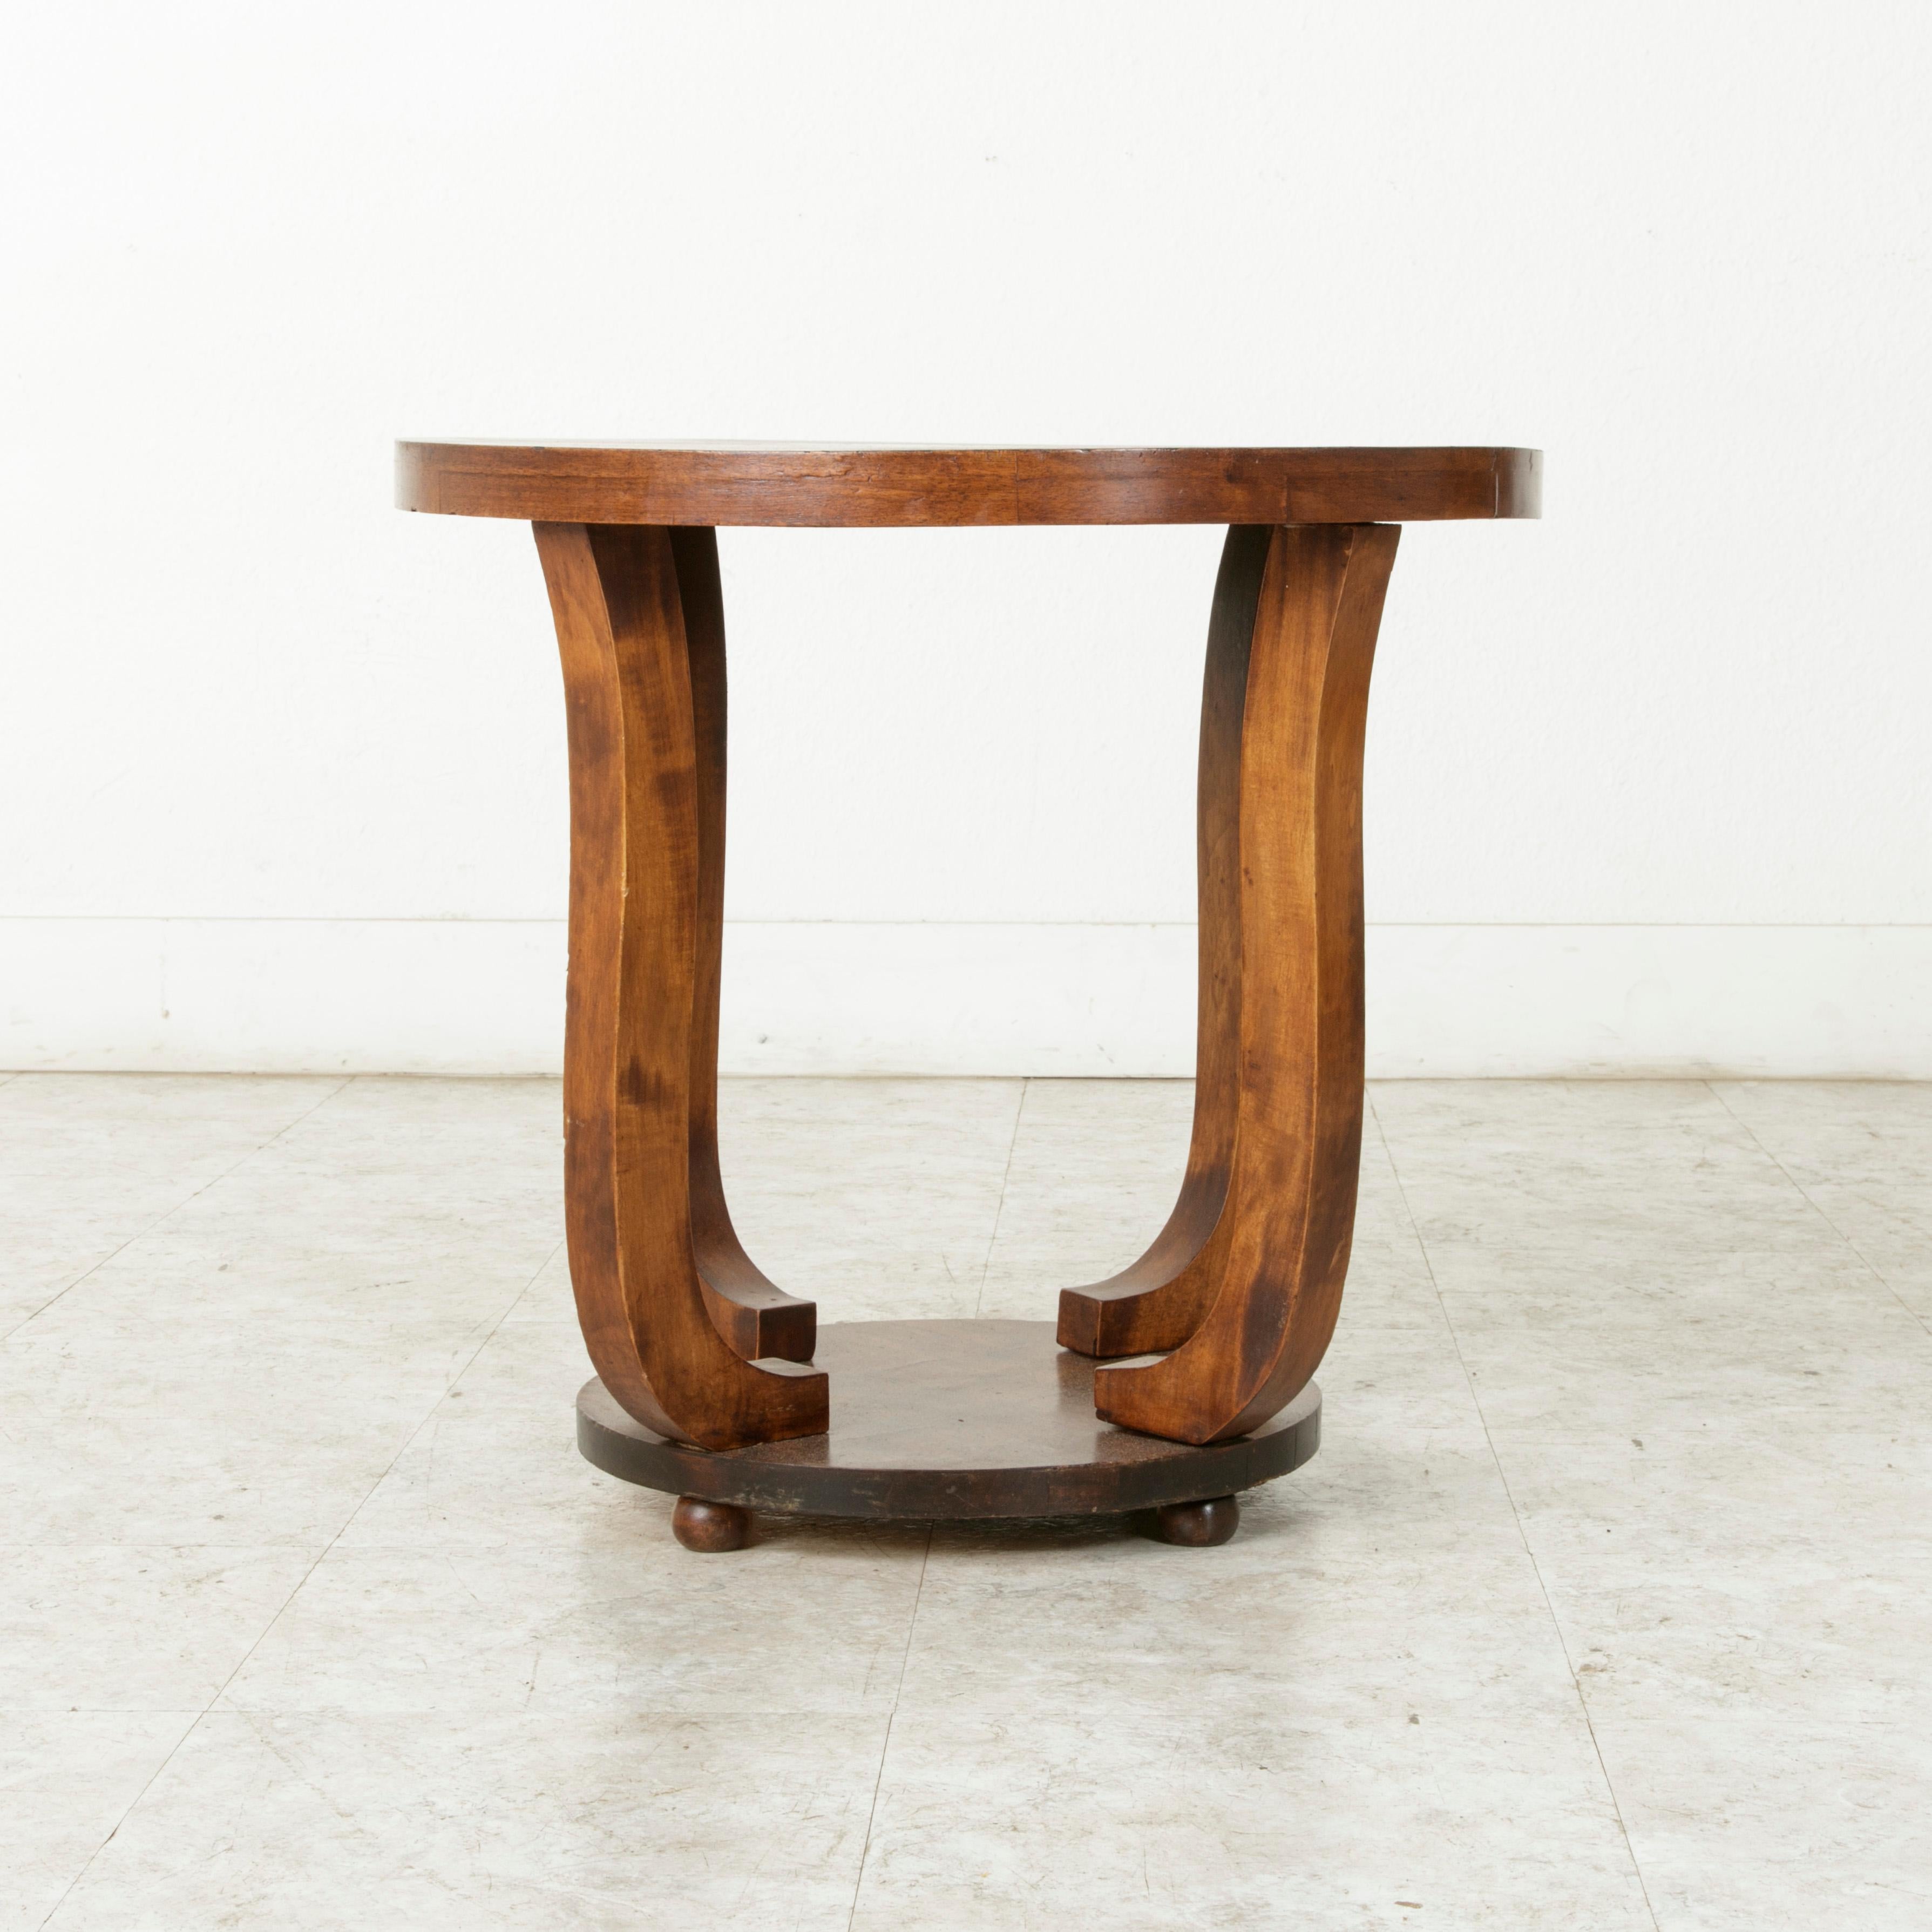 Early 20th Century French Art Deco Period Burl Walnut Guéridon or Side Table 1